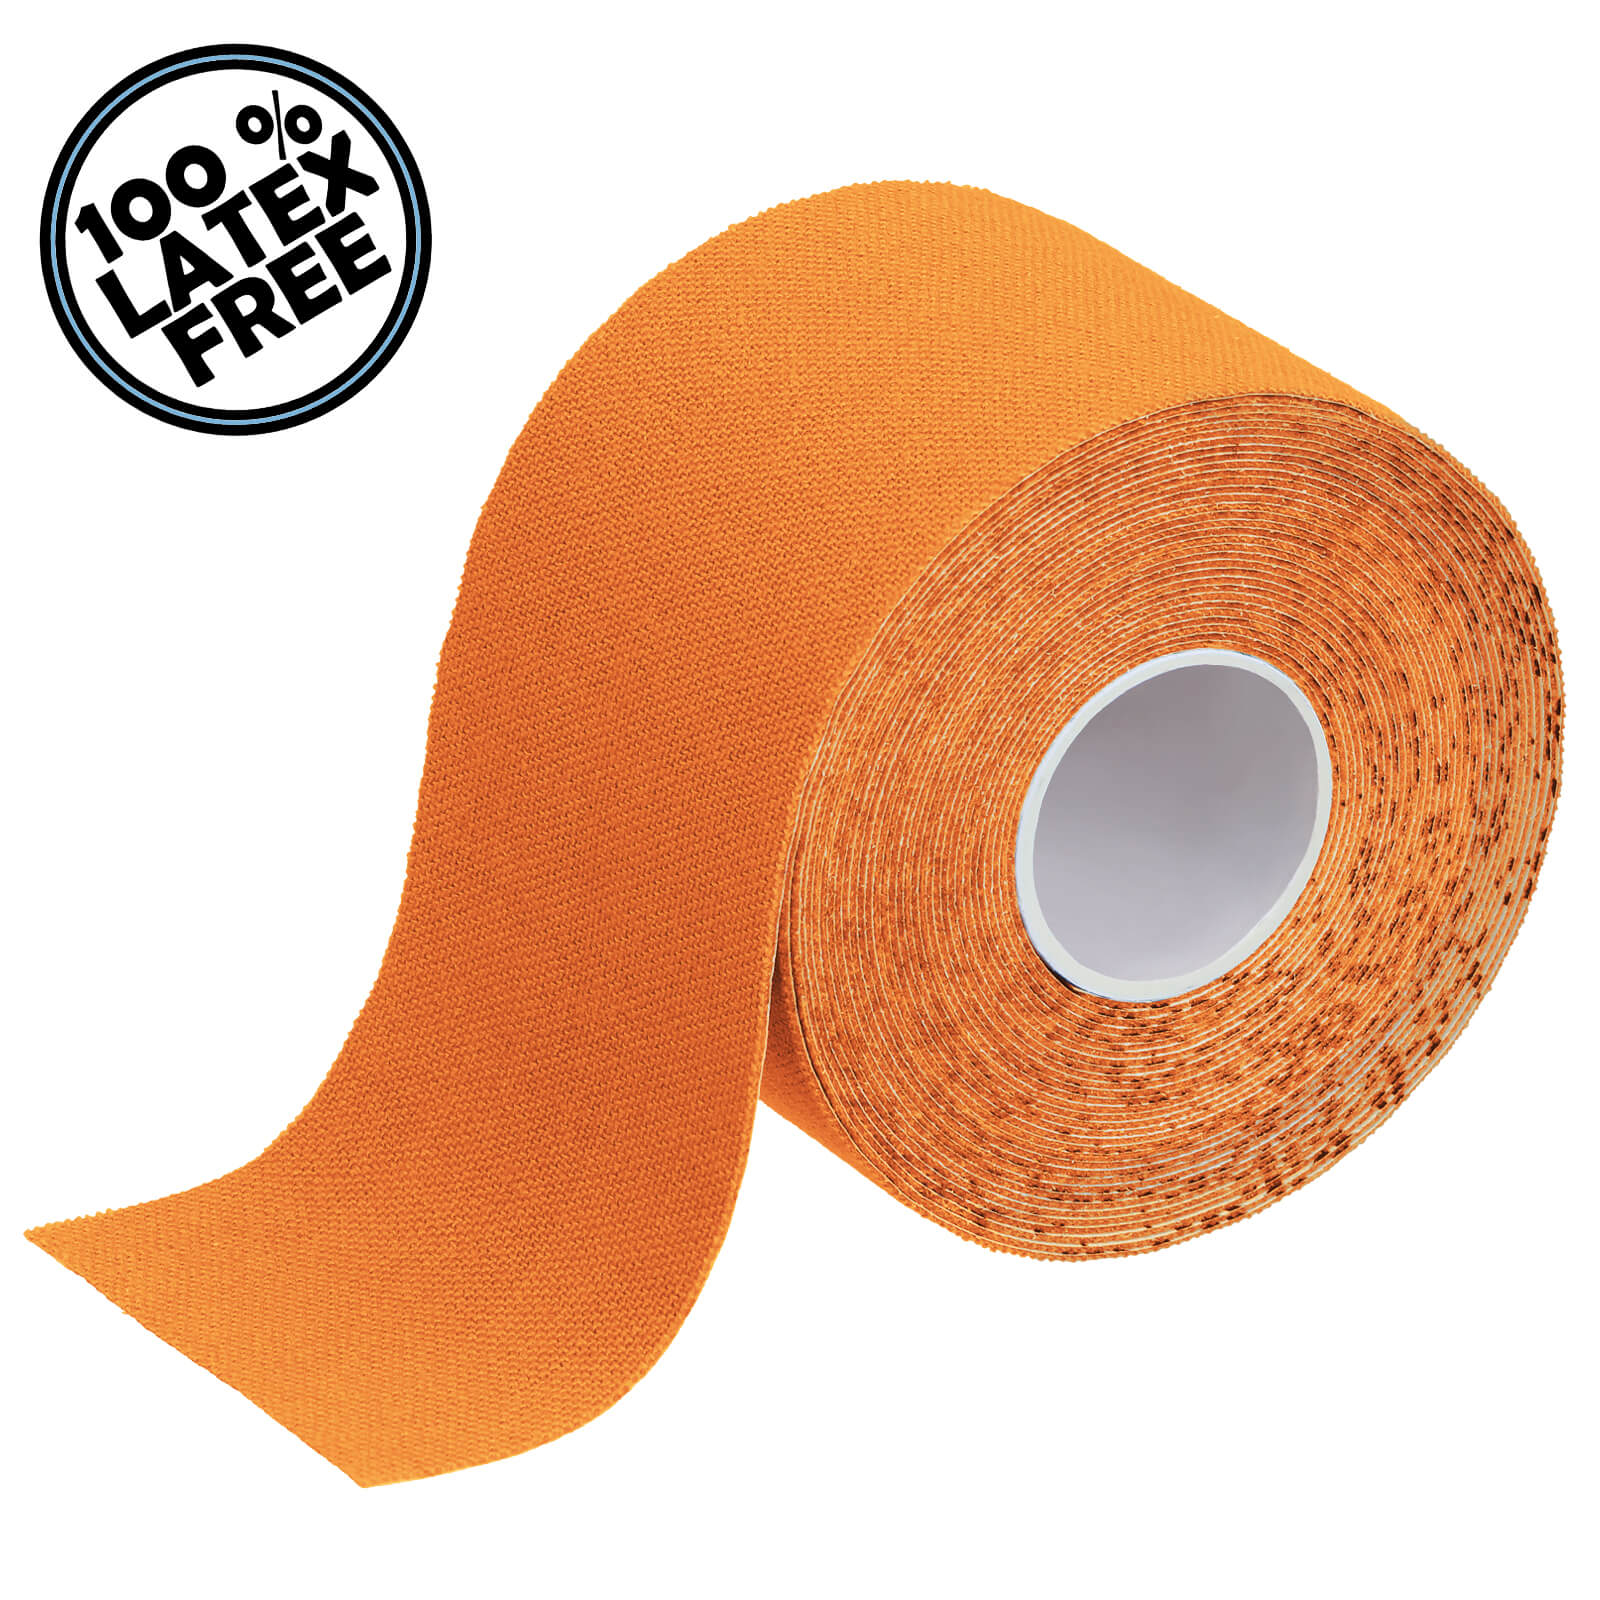 6 x Sports Tape 10 m x 3.8 cm in different colours